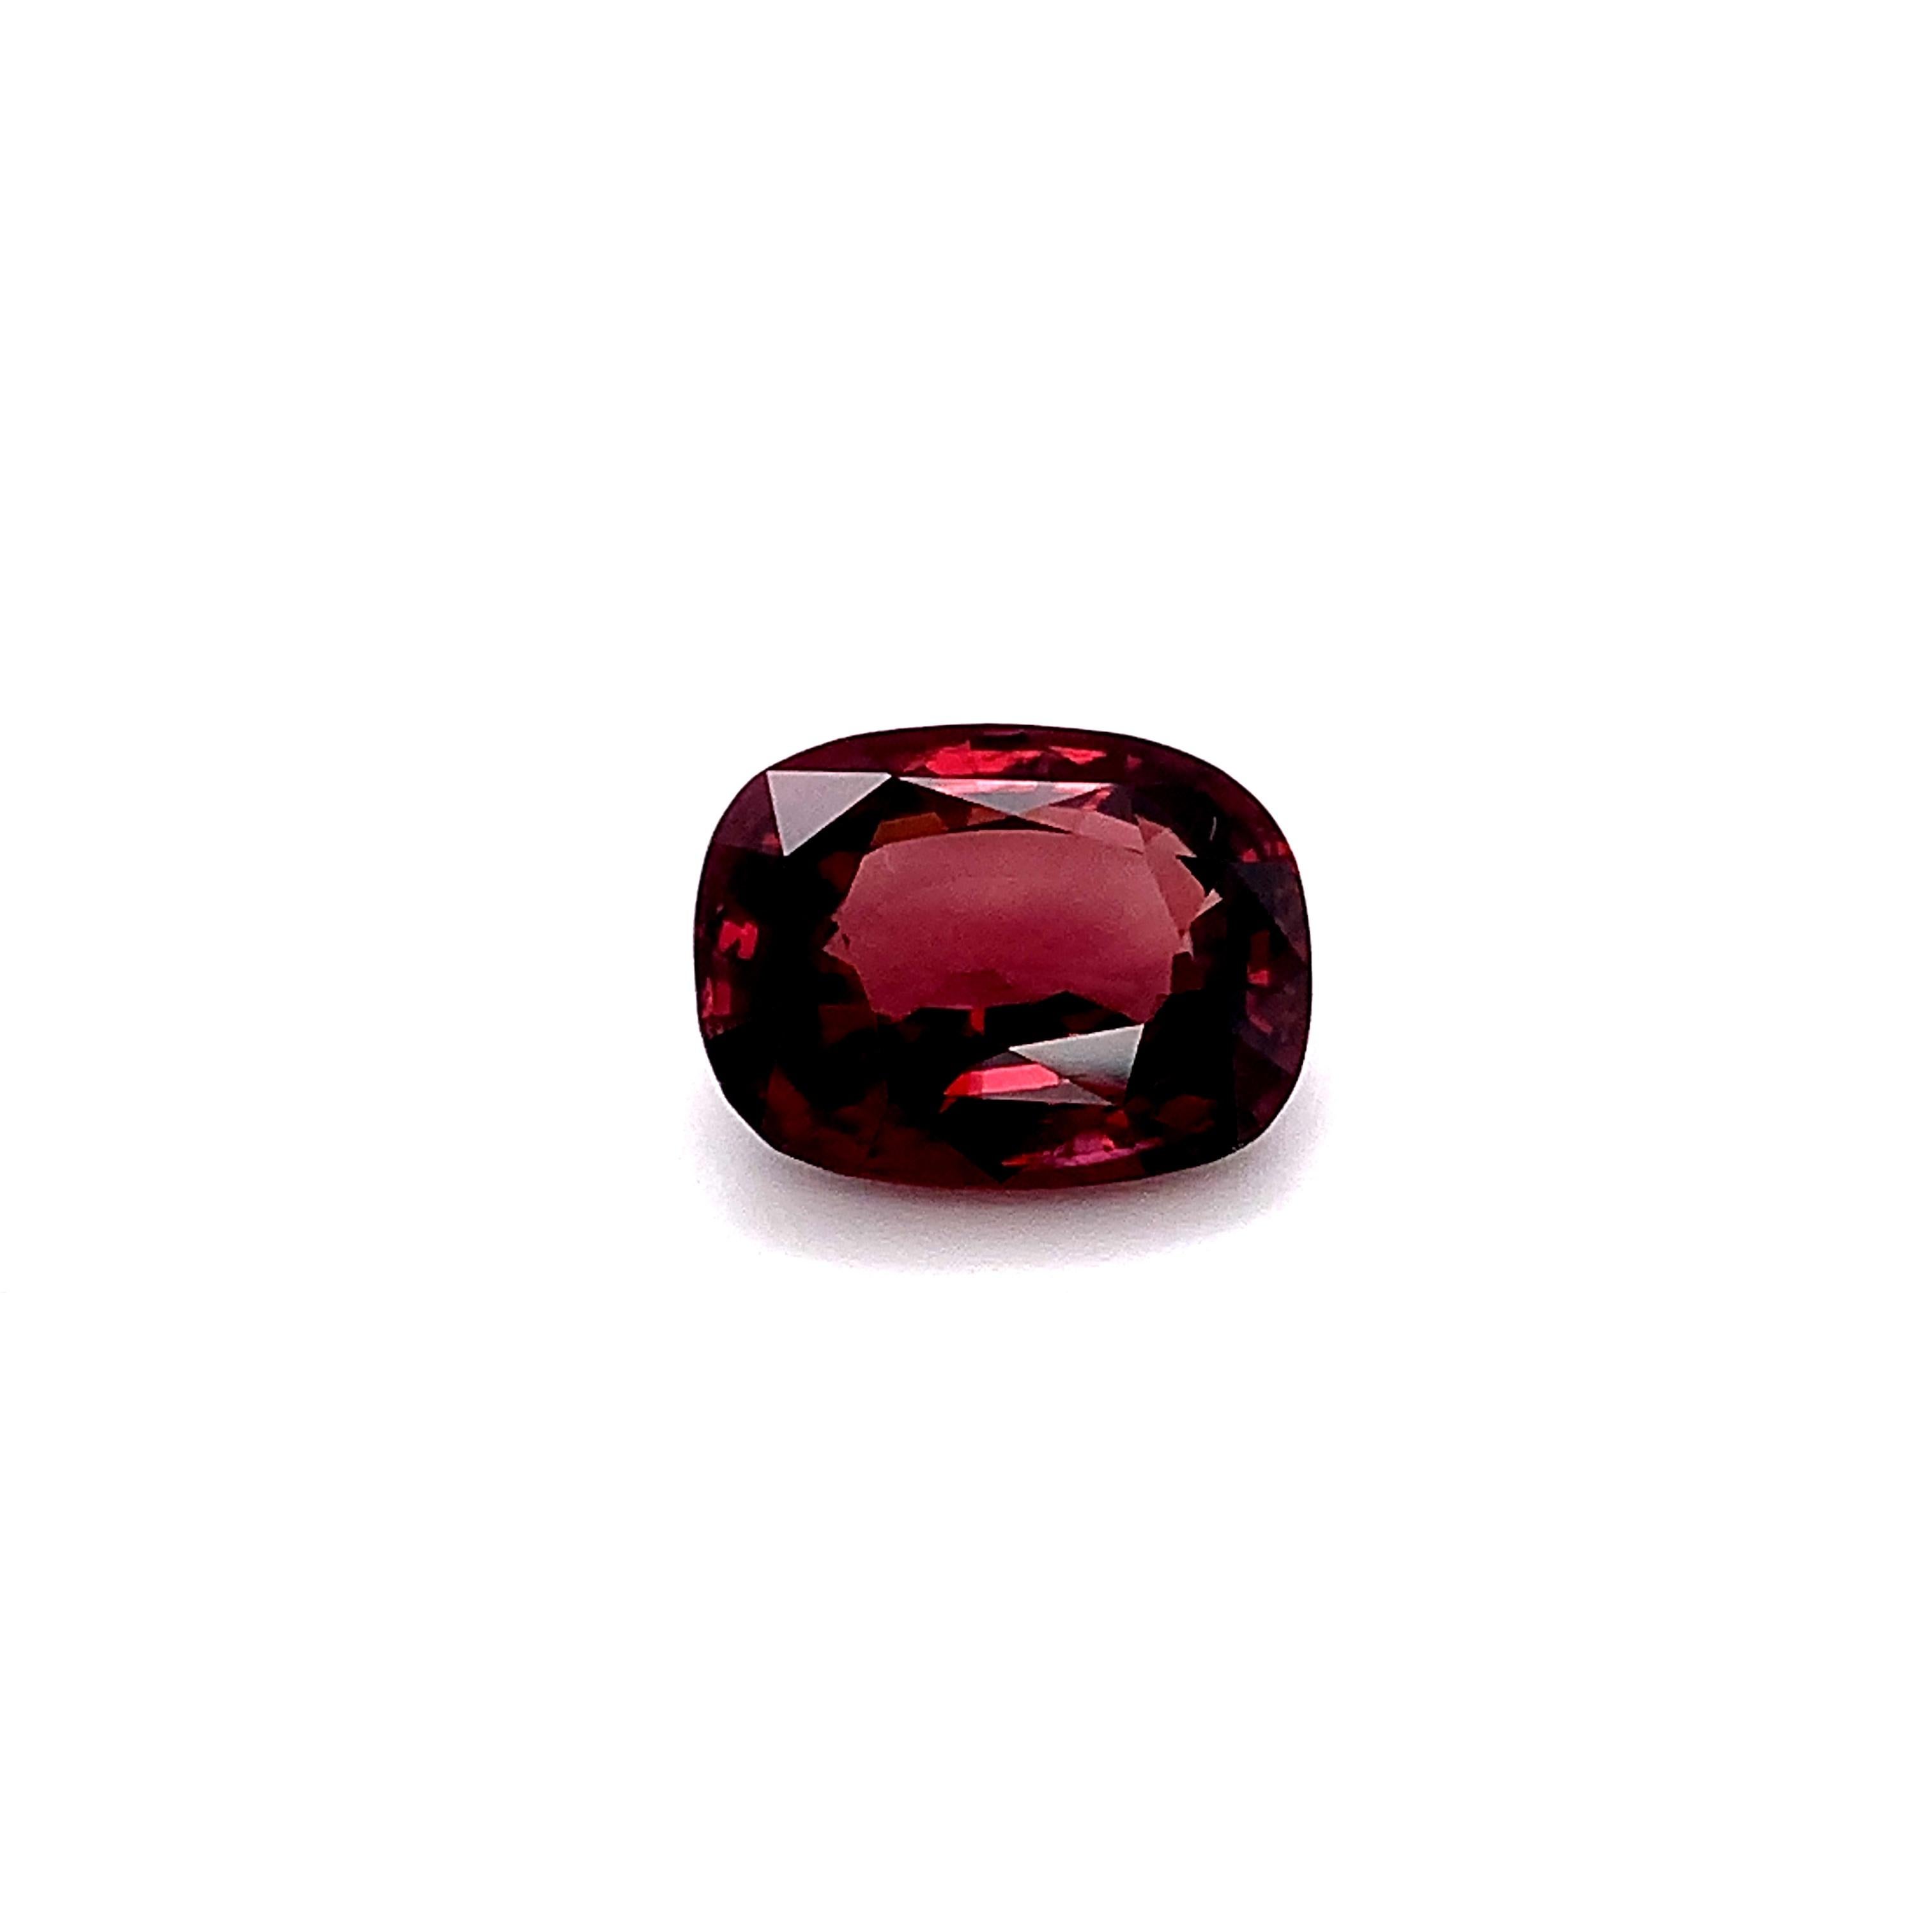 This unusually large zircon has a beautiful rose red color and exceptional clarity! While zircon is generally recognized for its bright blue variety, this December birthstone occurs in a rainbow of colors, including brilliant reds! Weighing 18.80